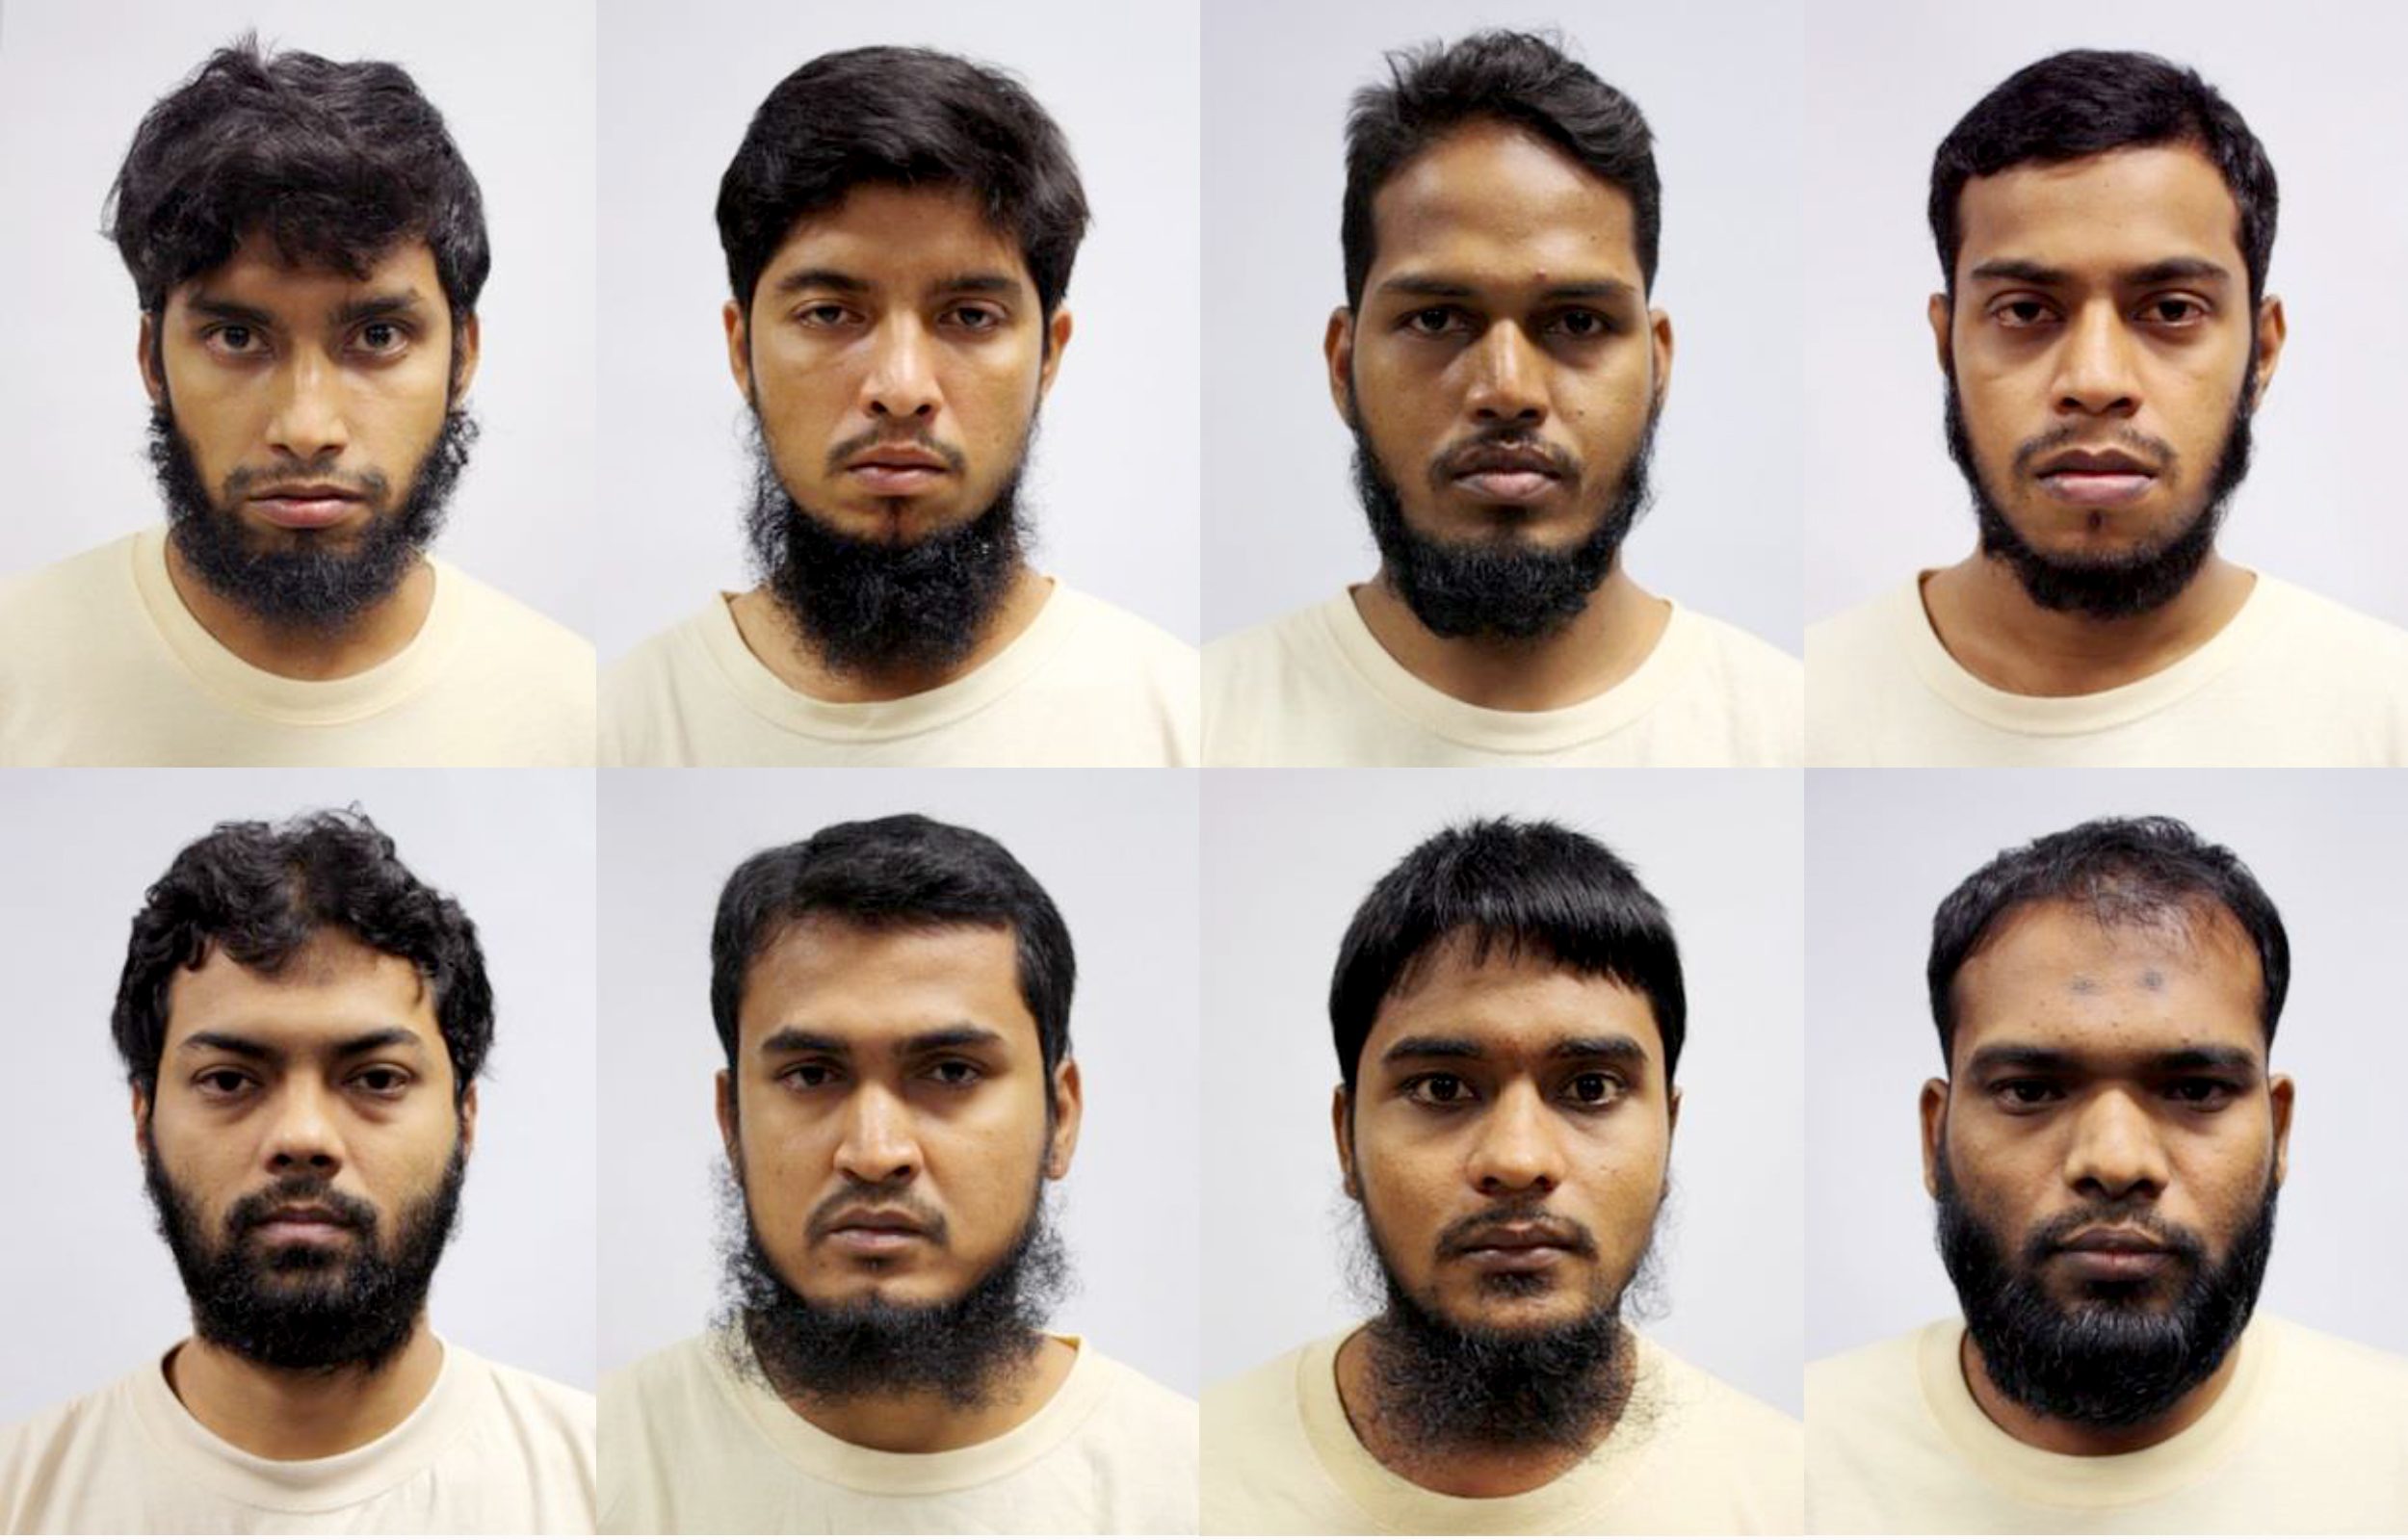 Singapore detains 8 Bangladeshis for alleged ISIS-related terror plot